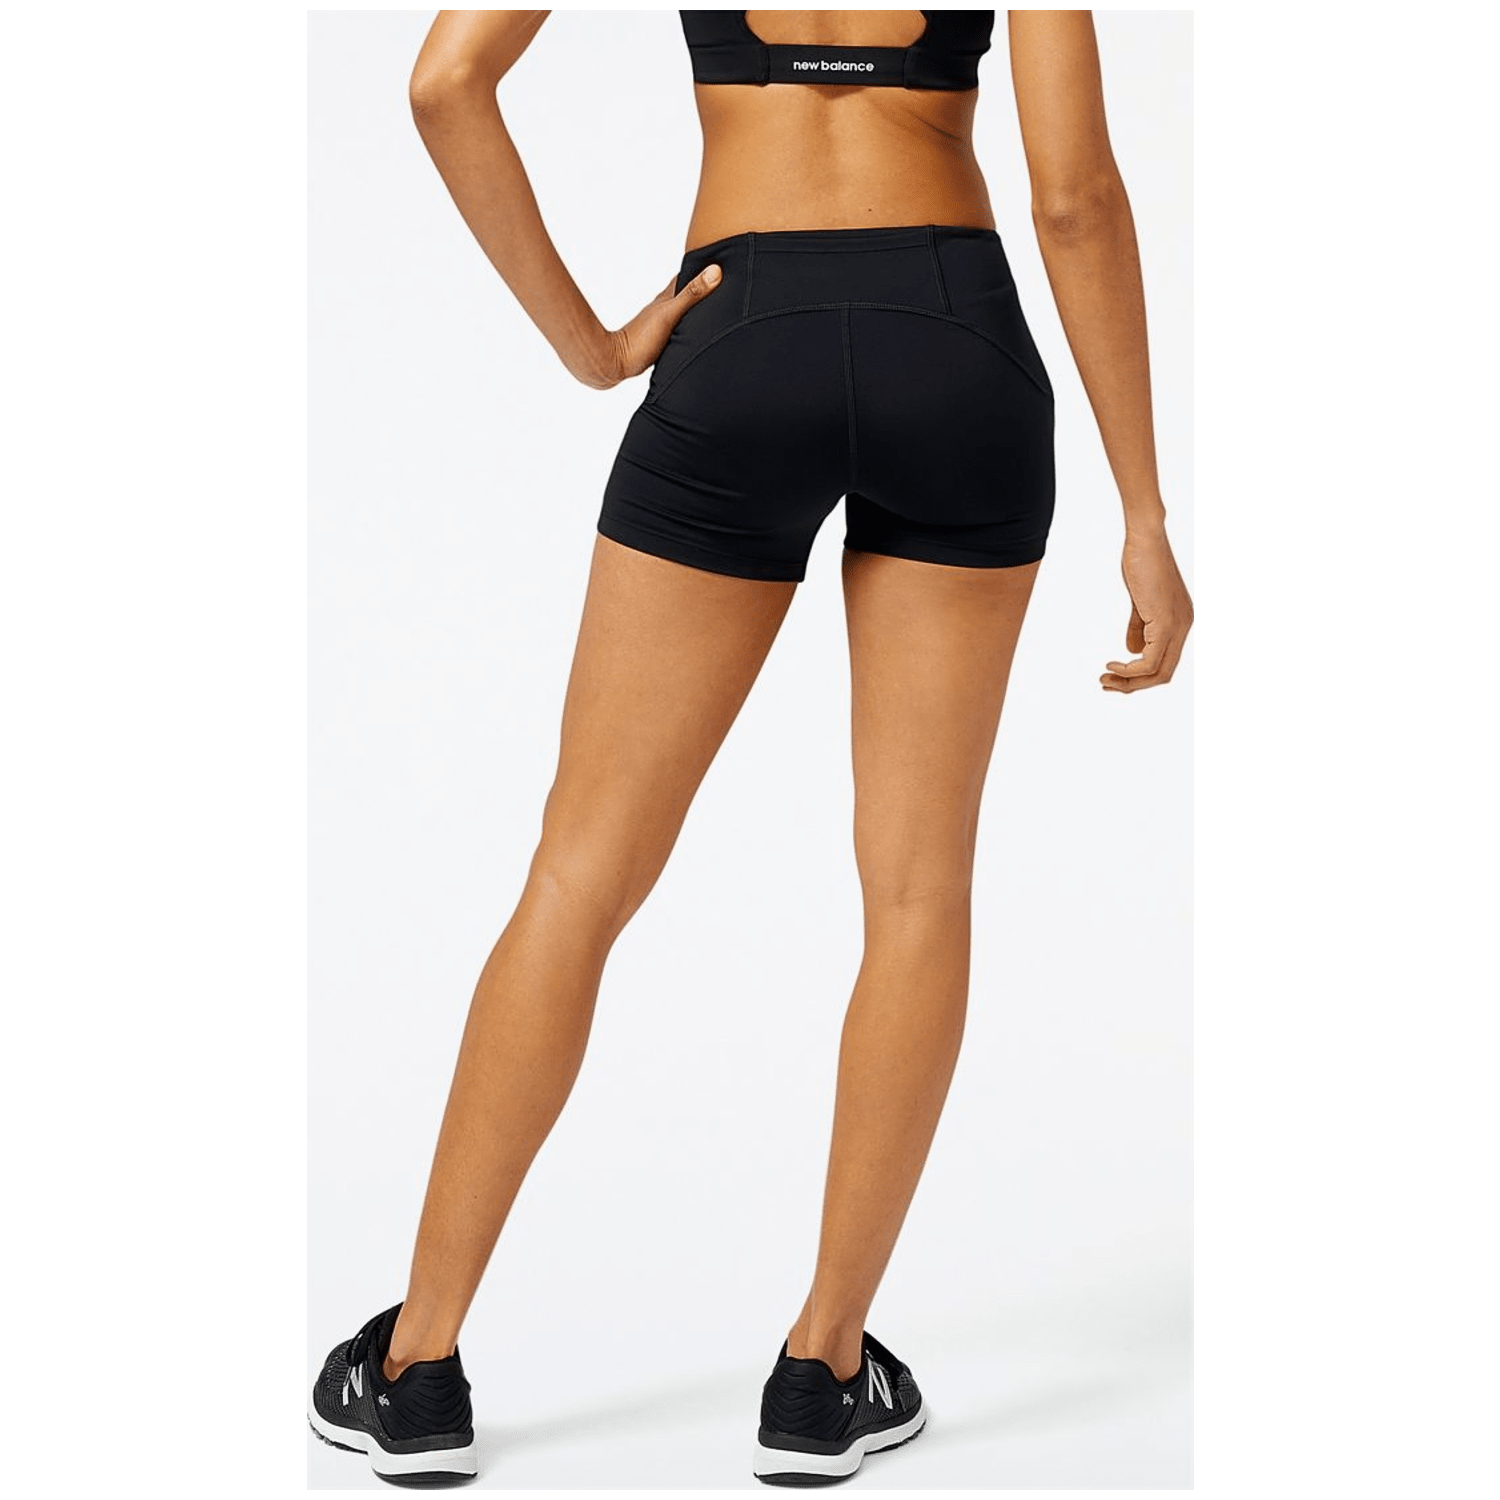 New Balance Accelerate Pacer 3.5 Inch Fitted Damen Shorts